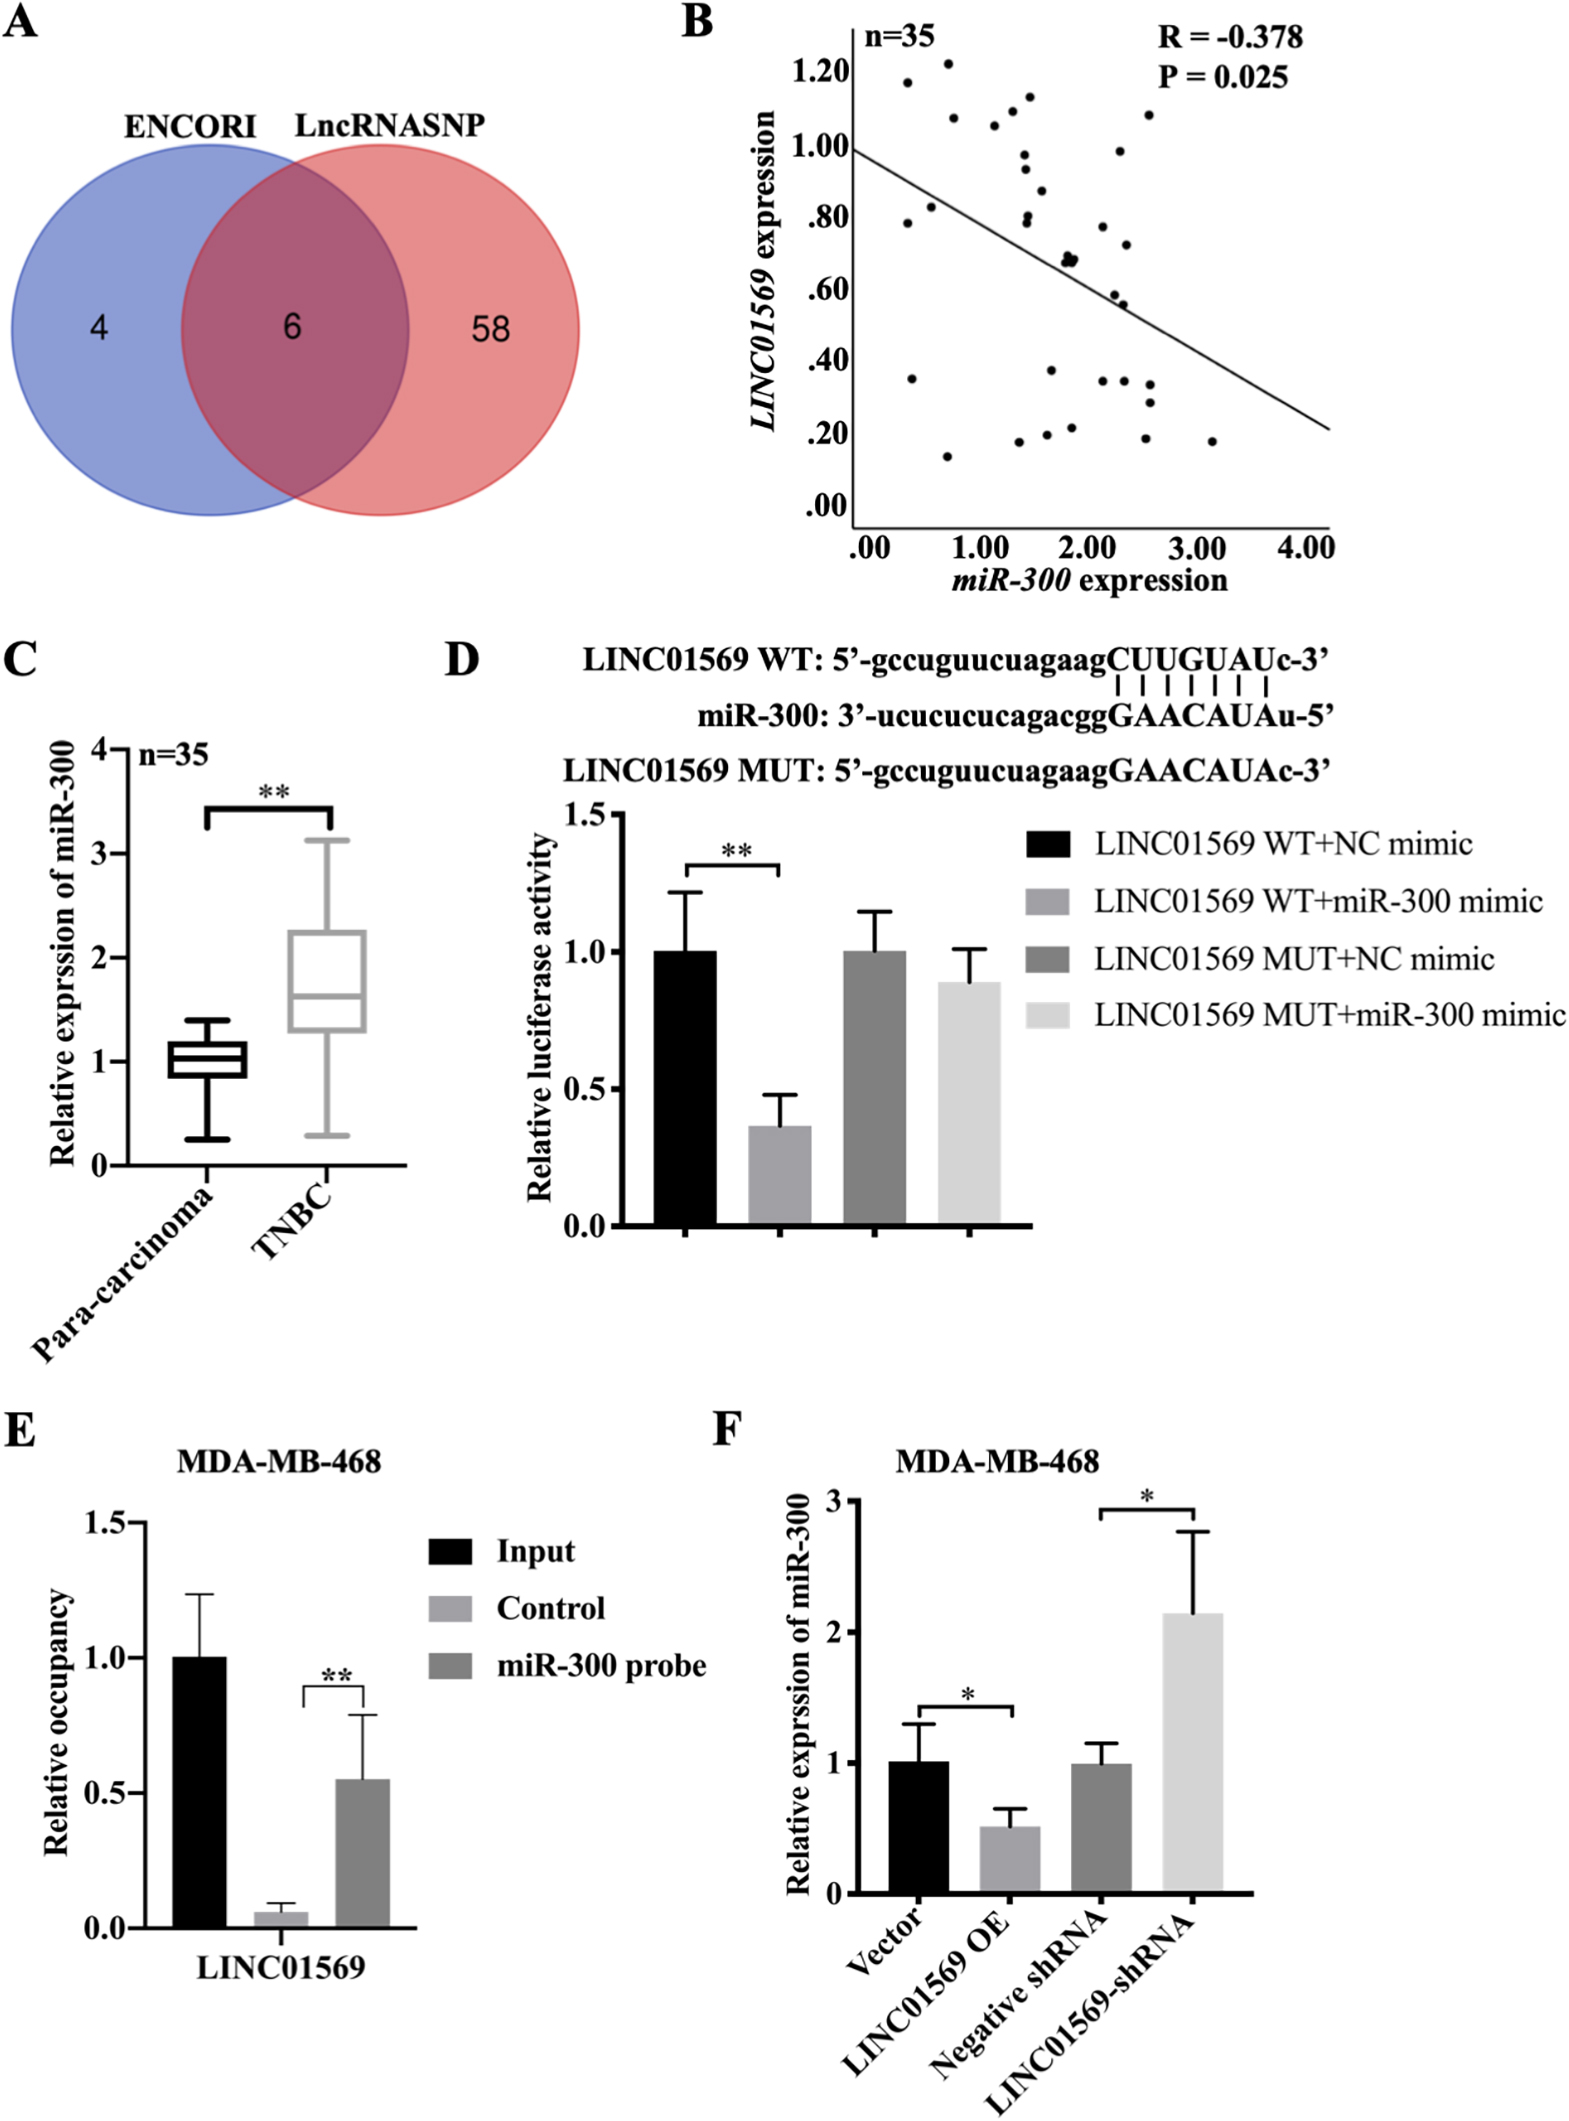 Association of LINC01569 and miR-300. (A) Potential downstream target microRNAs were analyzed by combining ENCORI and LncRNASNP online databases. (B) Relative expression of LINC01569 and miR-300 in TNBC tissues (n= 35) as determined using qRT-PCR. Then, SPSS was used to analyze the relationship of LINC01569 expression with miR-300 in TNBC samples. (C) Relative expression of miR-300 in samples of TNBC (n= 35) and paracancerous tissues using qRT-PCR. (D) Using the ENCORI Starbase, the binding sequence of LINC01569 and miR-300 was obtained. Luciferase activity was measured using the respective kits after transfection with LINC01569 WT and LINC01569 mut in the presence of an NC mimic or a miR-300 mimic. ** Indicated the LINC01569 WT transfected cells and the miR-300 mimic vs. LINC01569 WT and NC mimic. WT, wild-type; Mut, mutation. (E) Cell lysates were incubated with biotin-labeled miR-300 probes or control probes. The binding ability of LINC01569 and miR-300 to RNA binding complexes was then validated using qRT-PCR. (F) MDA-MB-468 was transfected with LINC01569 overexpression plasmid, siRNA, and the corresponding control vector/negative siRNA. The expression of miR-300 was measured using qRT-PCR in MDA-MB-468. U6 was served as the internal control for RT-PCR of microRNA. * Indicated the comparison of vector vs. LINC01569 OE or siRNA vs. LINC01569-siRNA. Data are shown as mean ± standard deviation. Detection was performed at least three times. * P < 0.05, **P < 0.01.